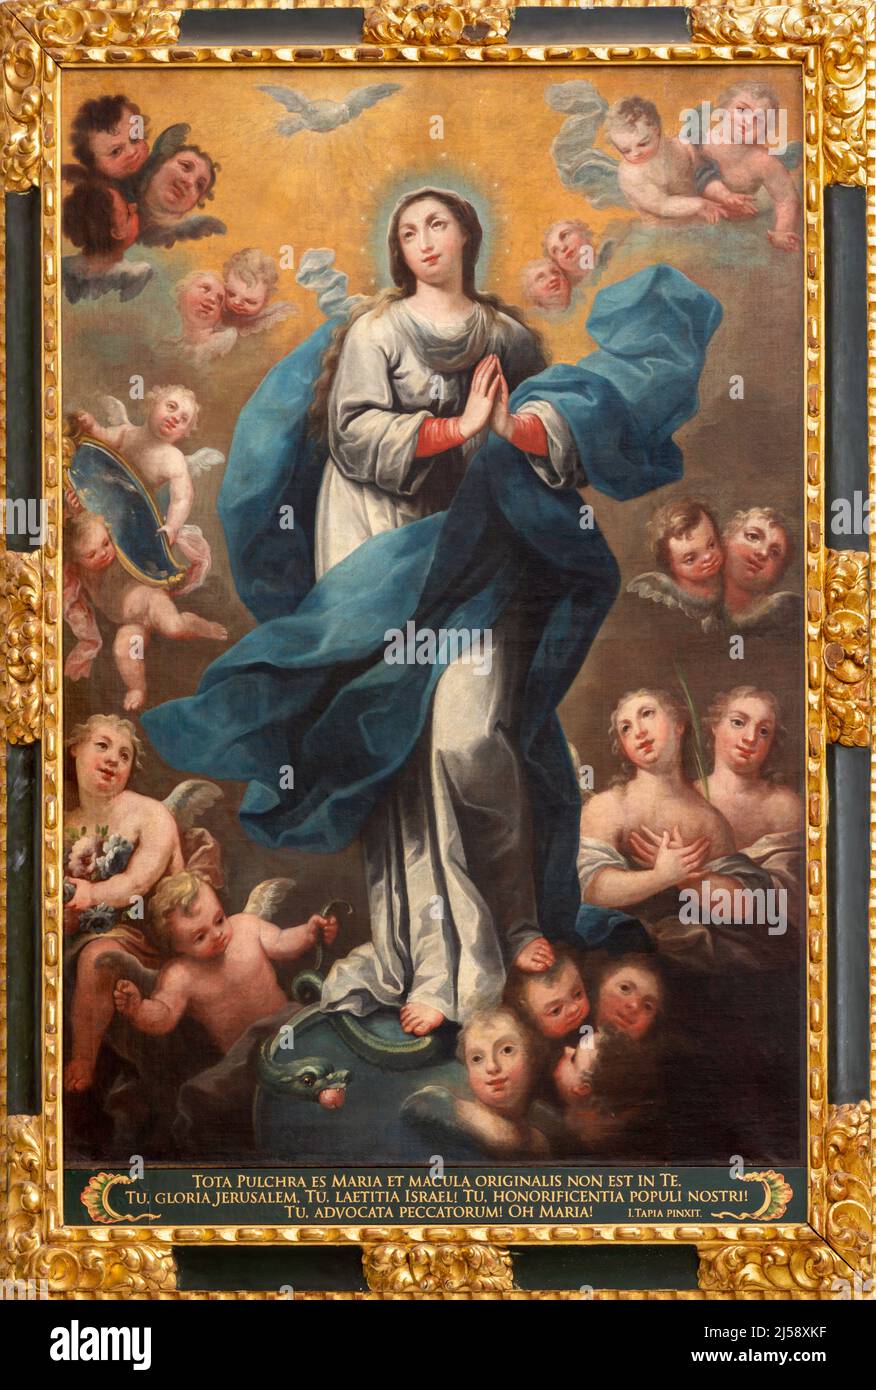 VALENCIA, SPAIN - FEBRUAR 17, 2022: The painting of Immaculate Conception in the church Iglesia de San Marín by Isidoro Tapia (1712 - 1778). Stock Photo